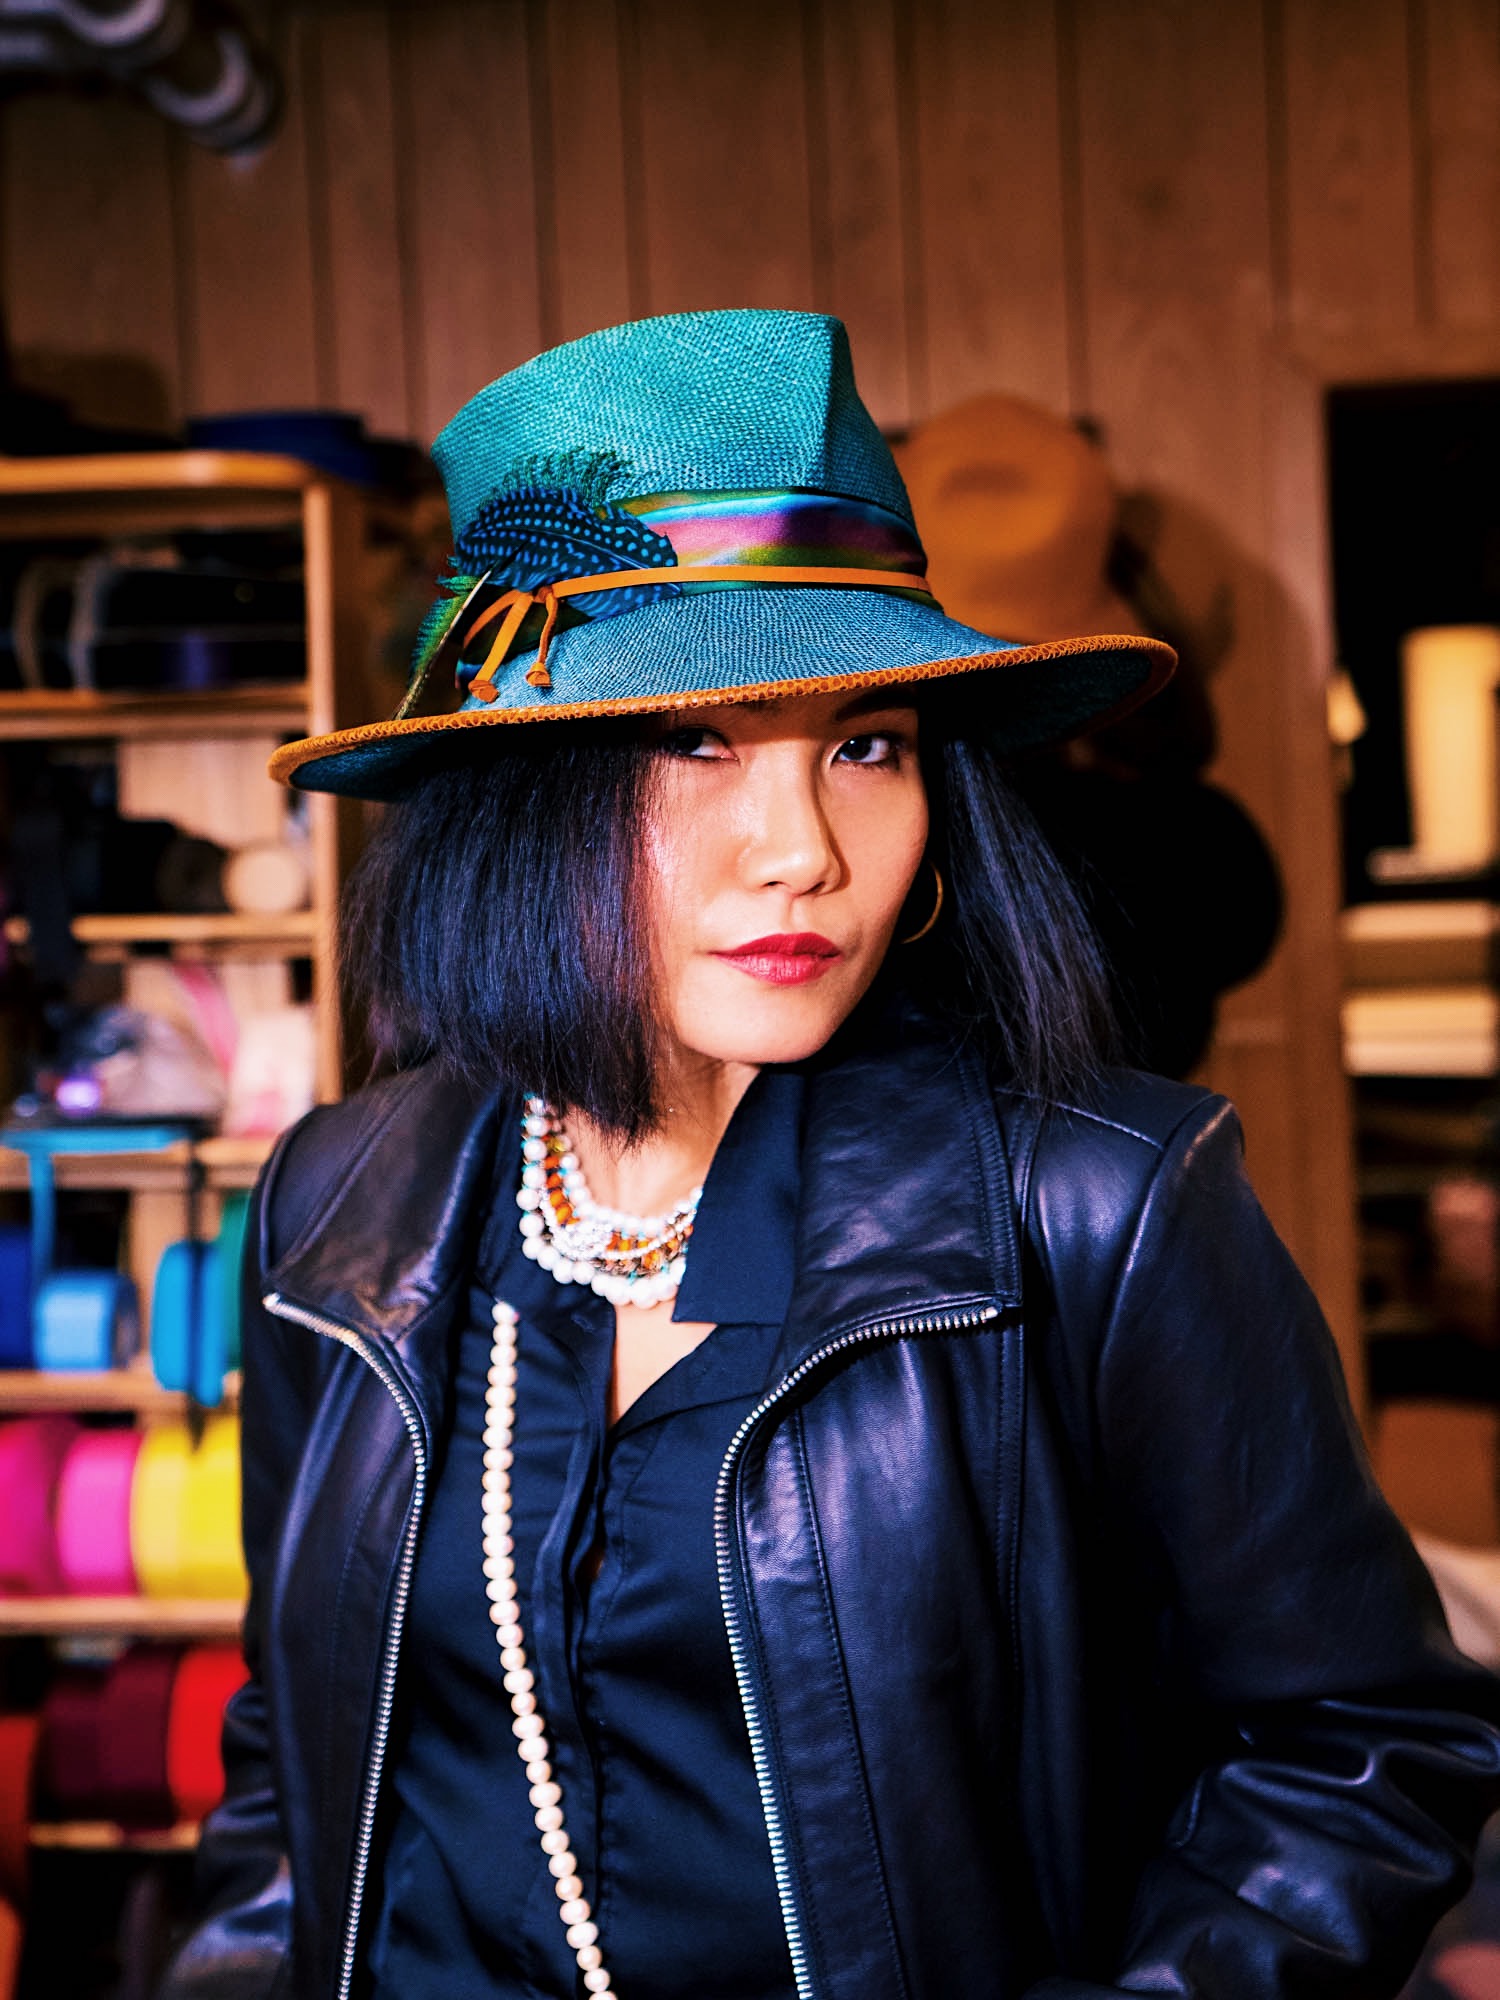 nanphanita is wearing teal and blue ombre fedora hat made by cha cha